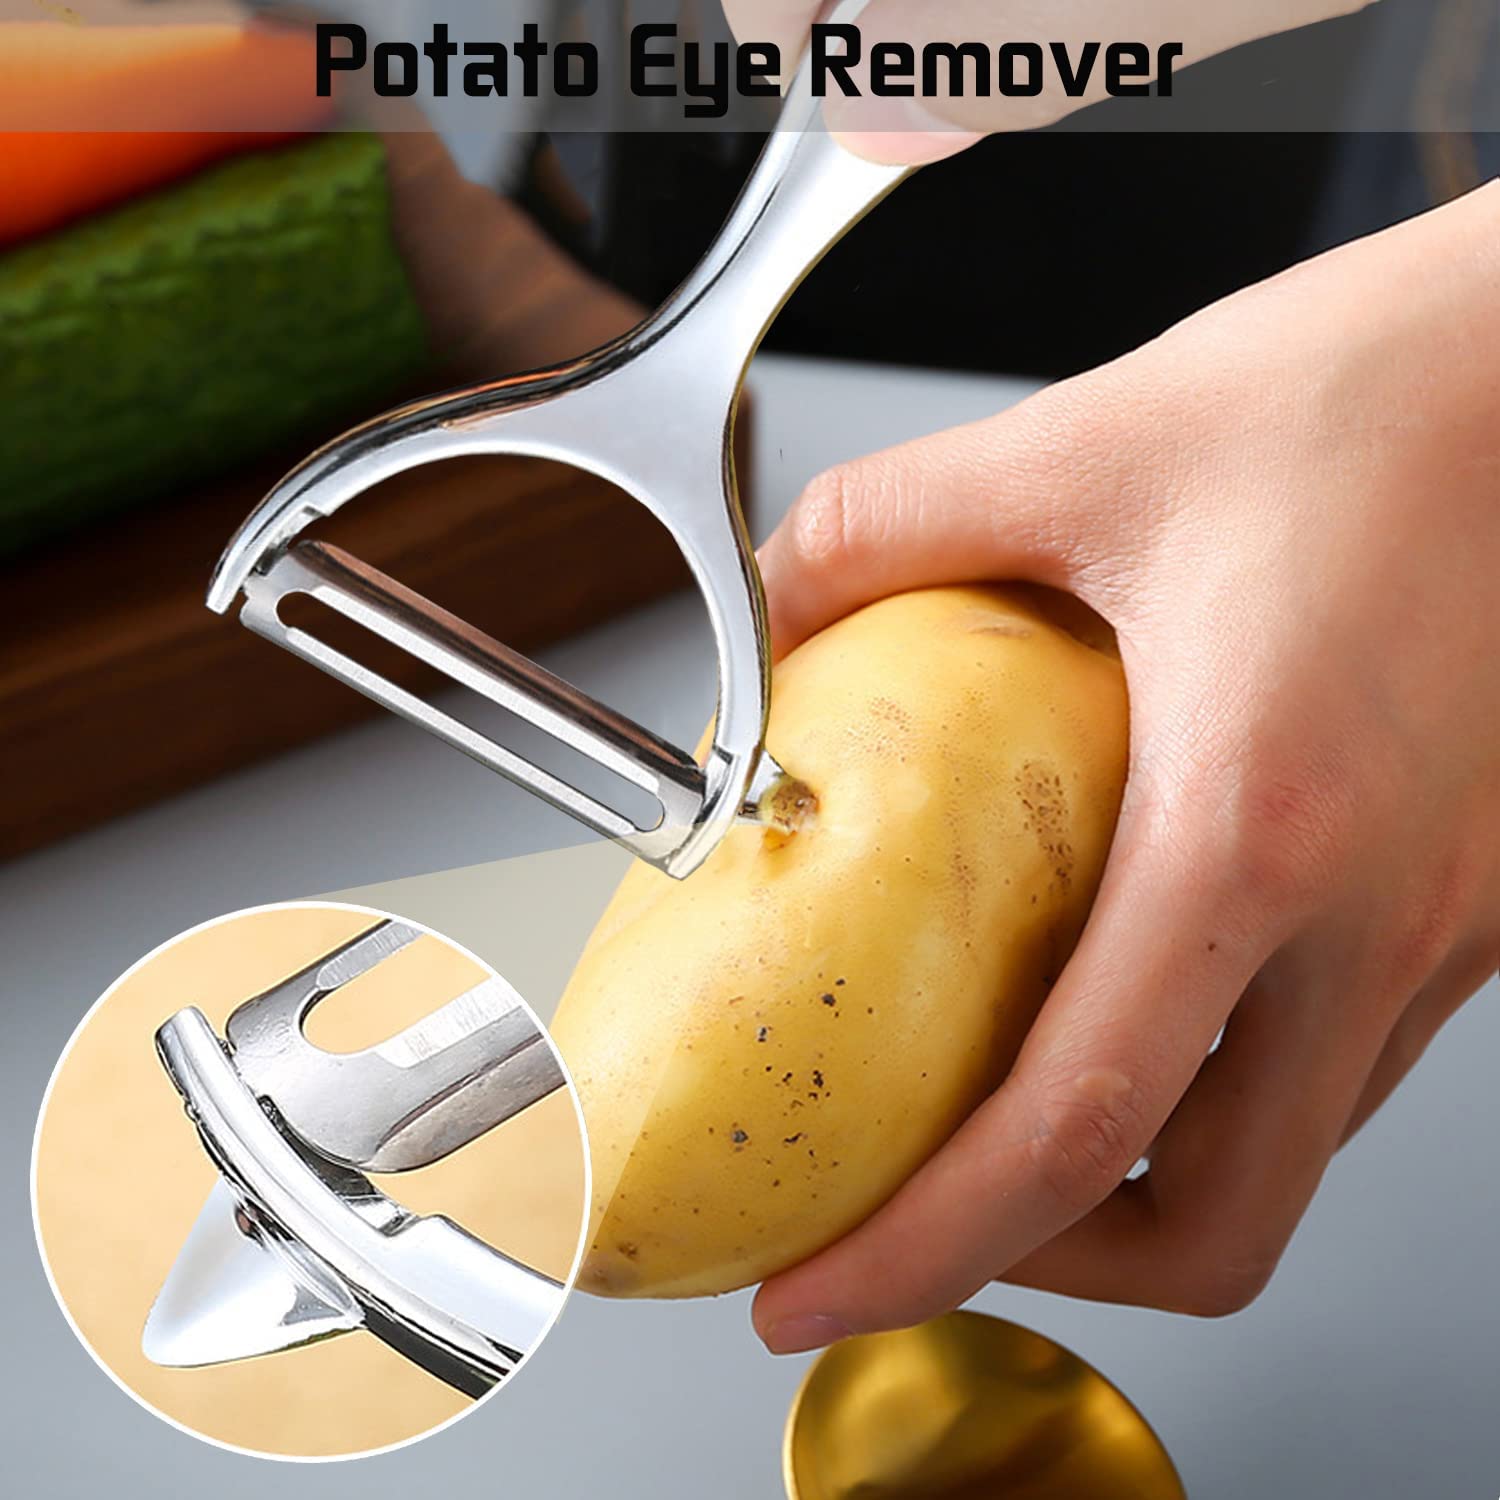 Multifunctional Stainless Steel Julienne Vegetable and Fruit Peeler –  ChopChopChef